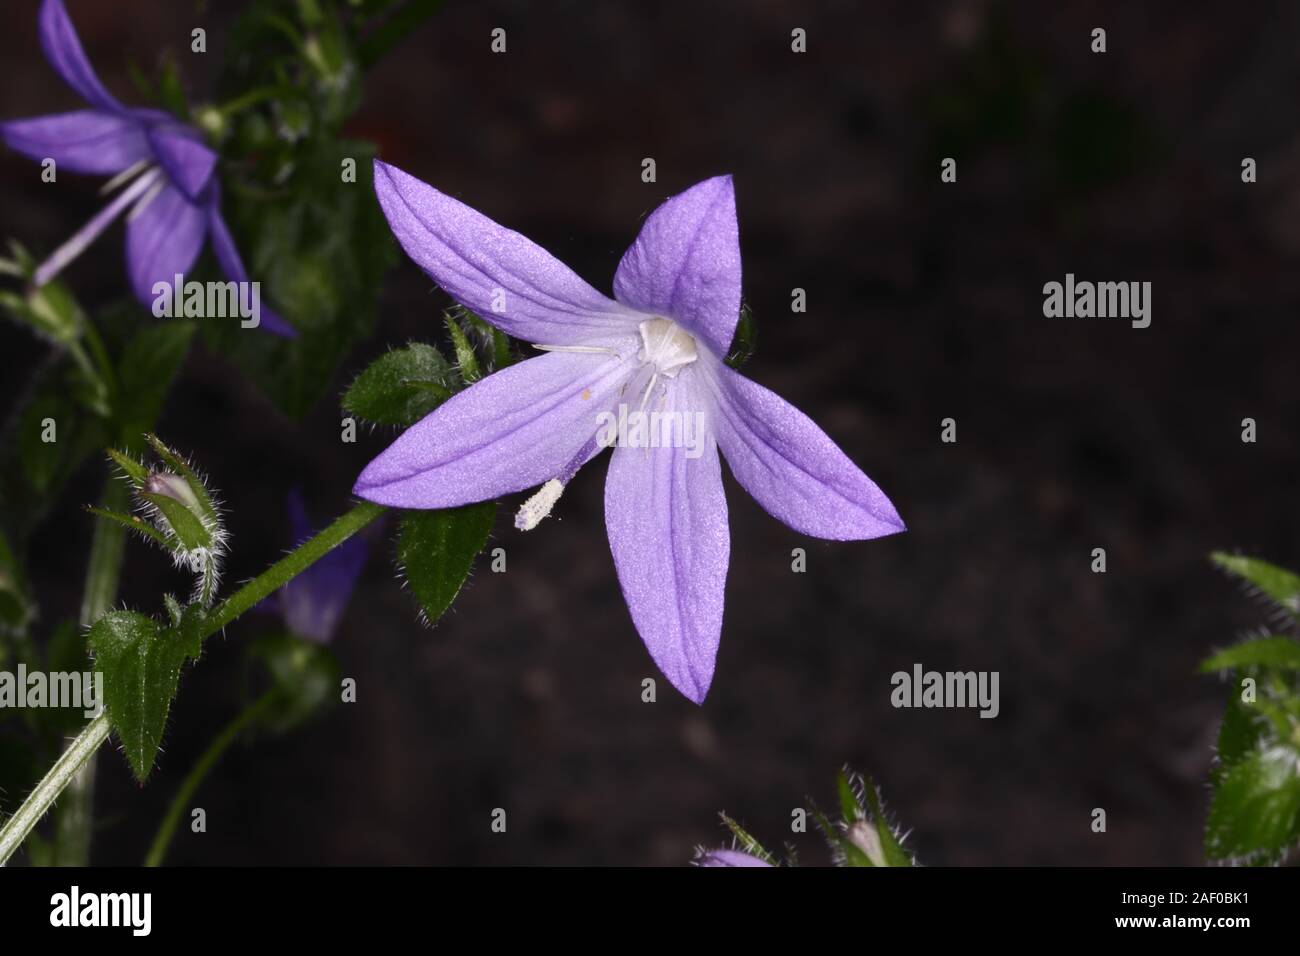 Campanula garganica W.H. Paine is a small perennial forming rounded basal leaves. Spreading stems bear starry, white-eyed, lavender-blue flowers. Stock Photo